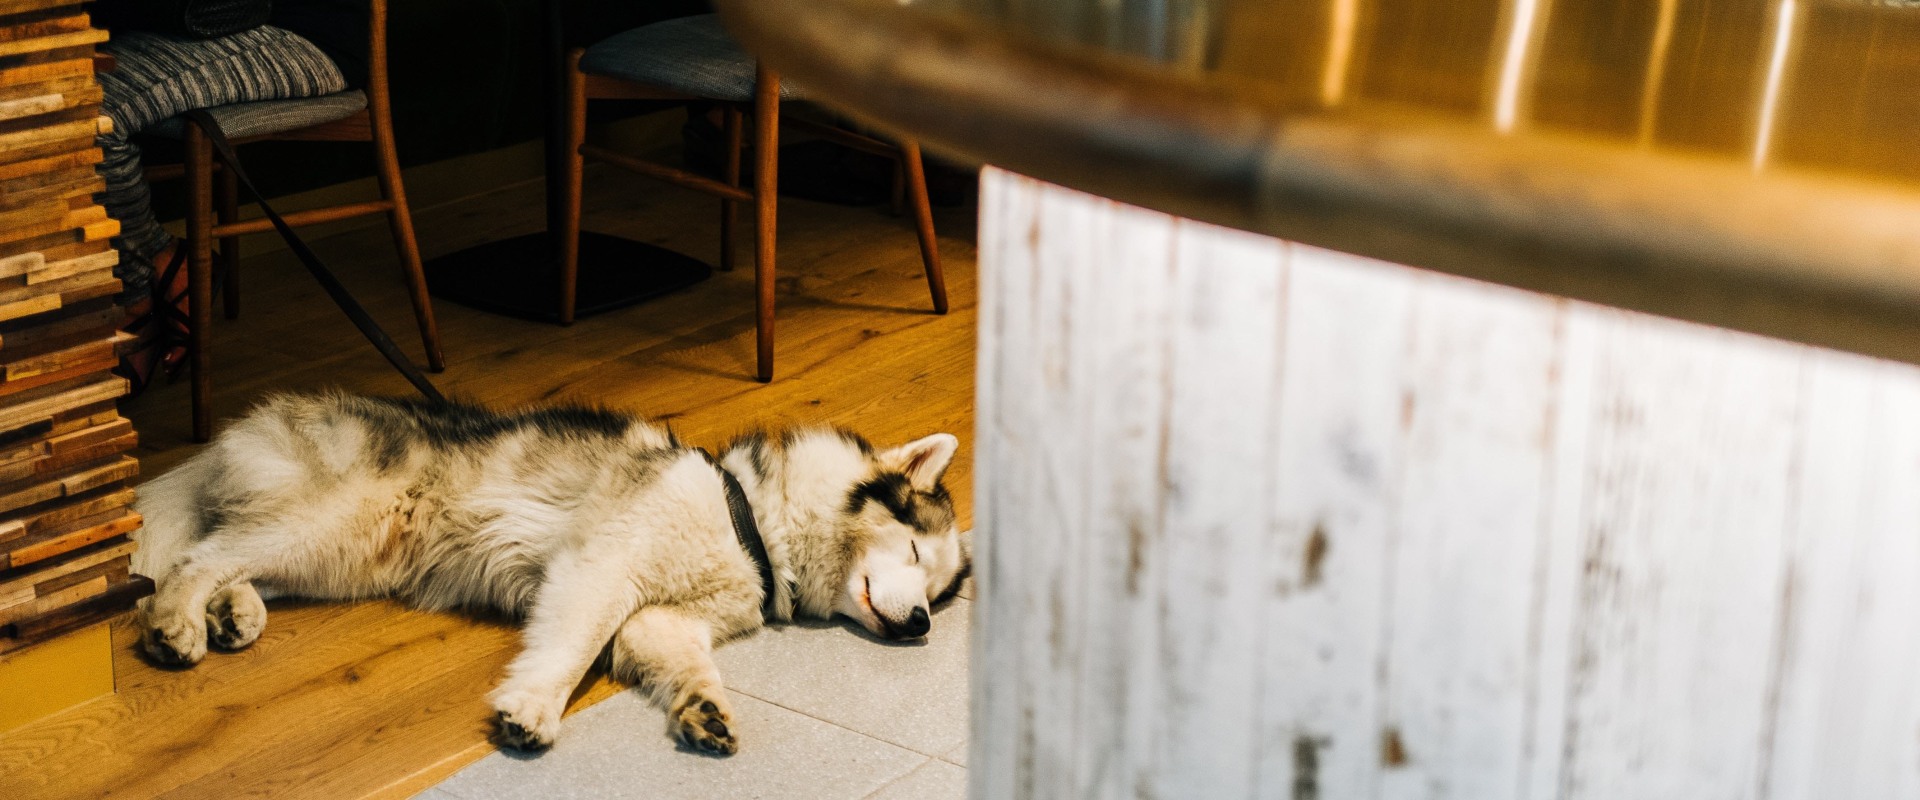 Dog-Friendly Pubs in Chicago, IL: A Guide for Pet Owners